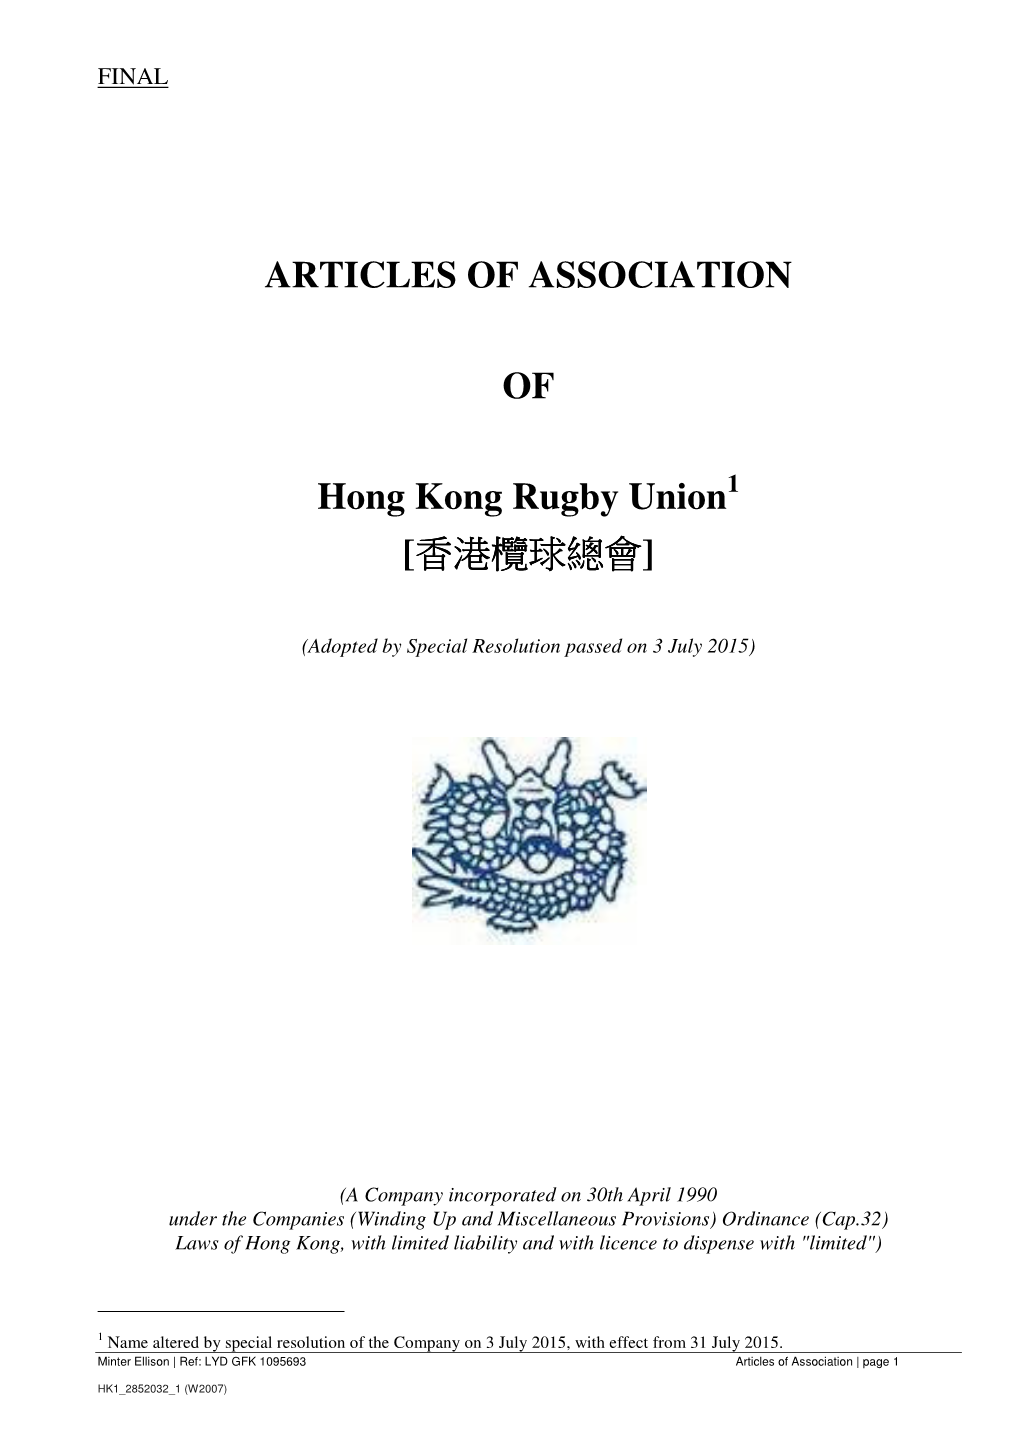 ARTICLES of ASSOCIATION of Hong Kong Rugby Union [香港欖球